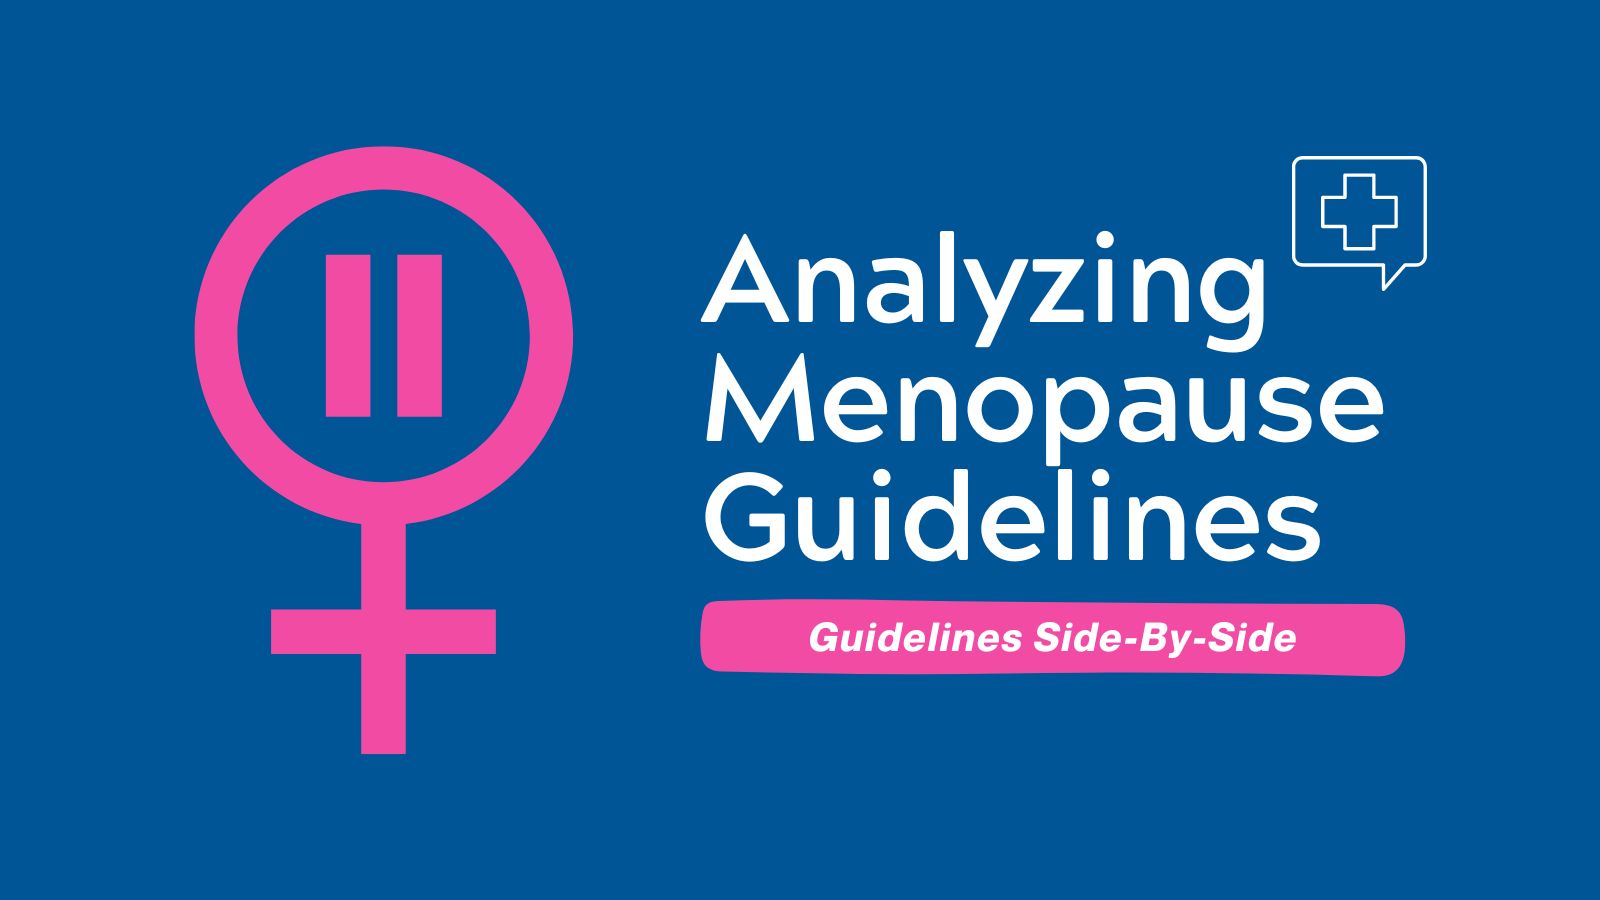 Menopause Guidelines Side-By-Side